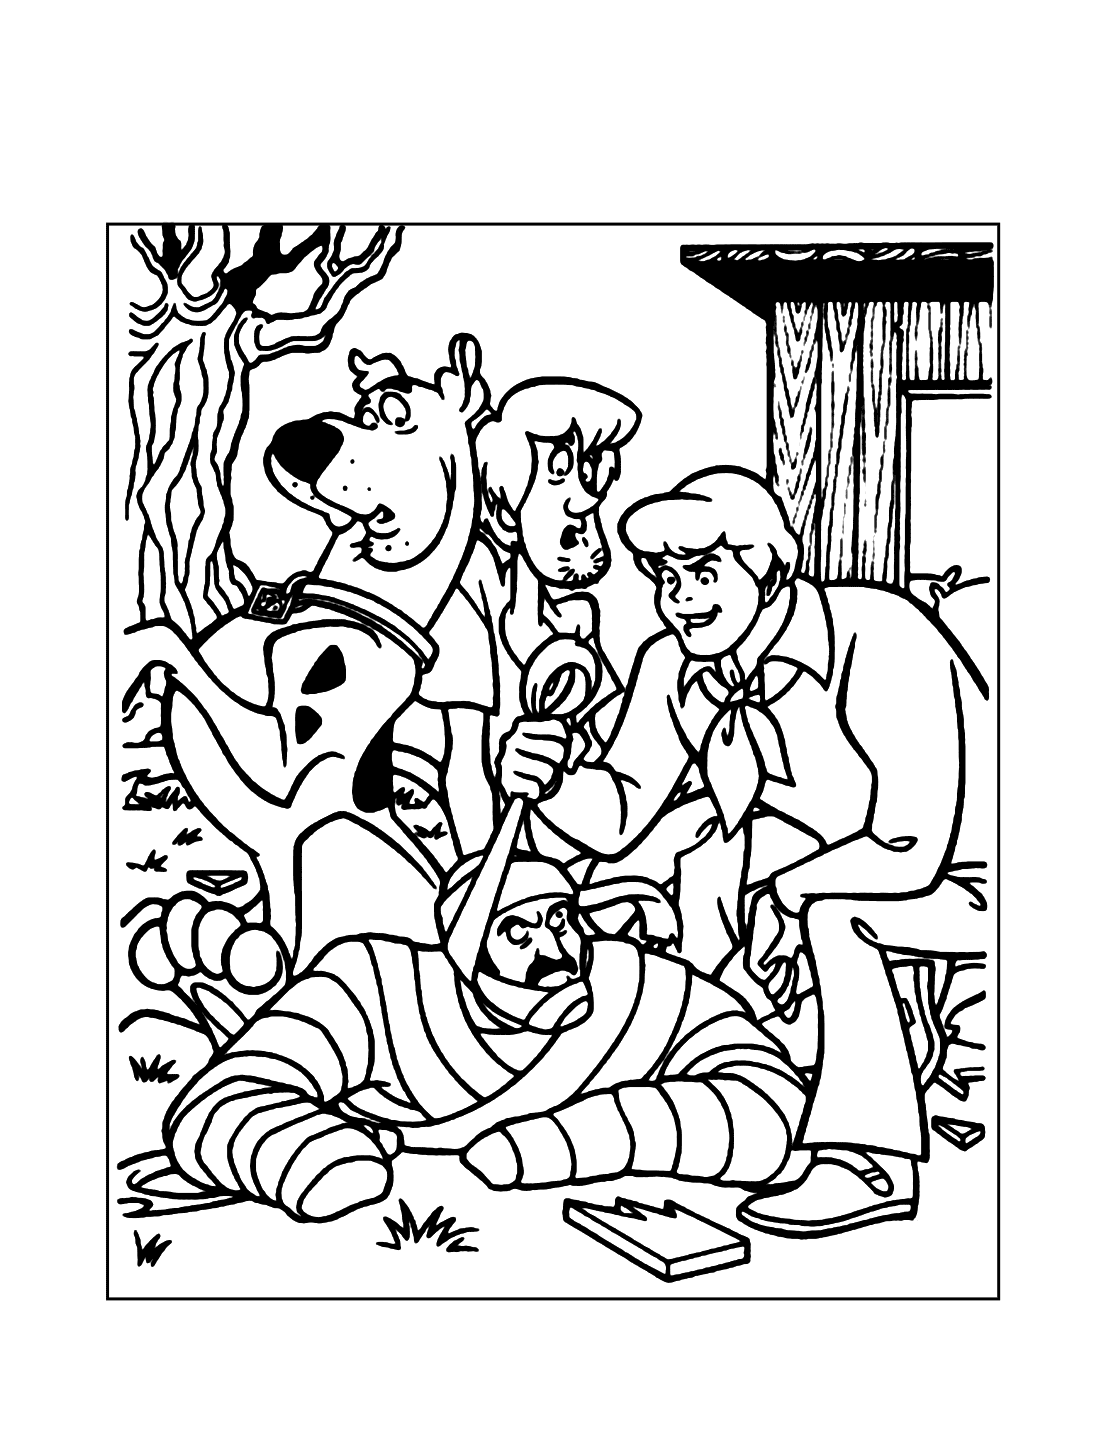 Scooby Doo Scene Coloring Page